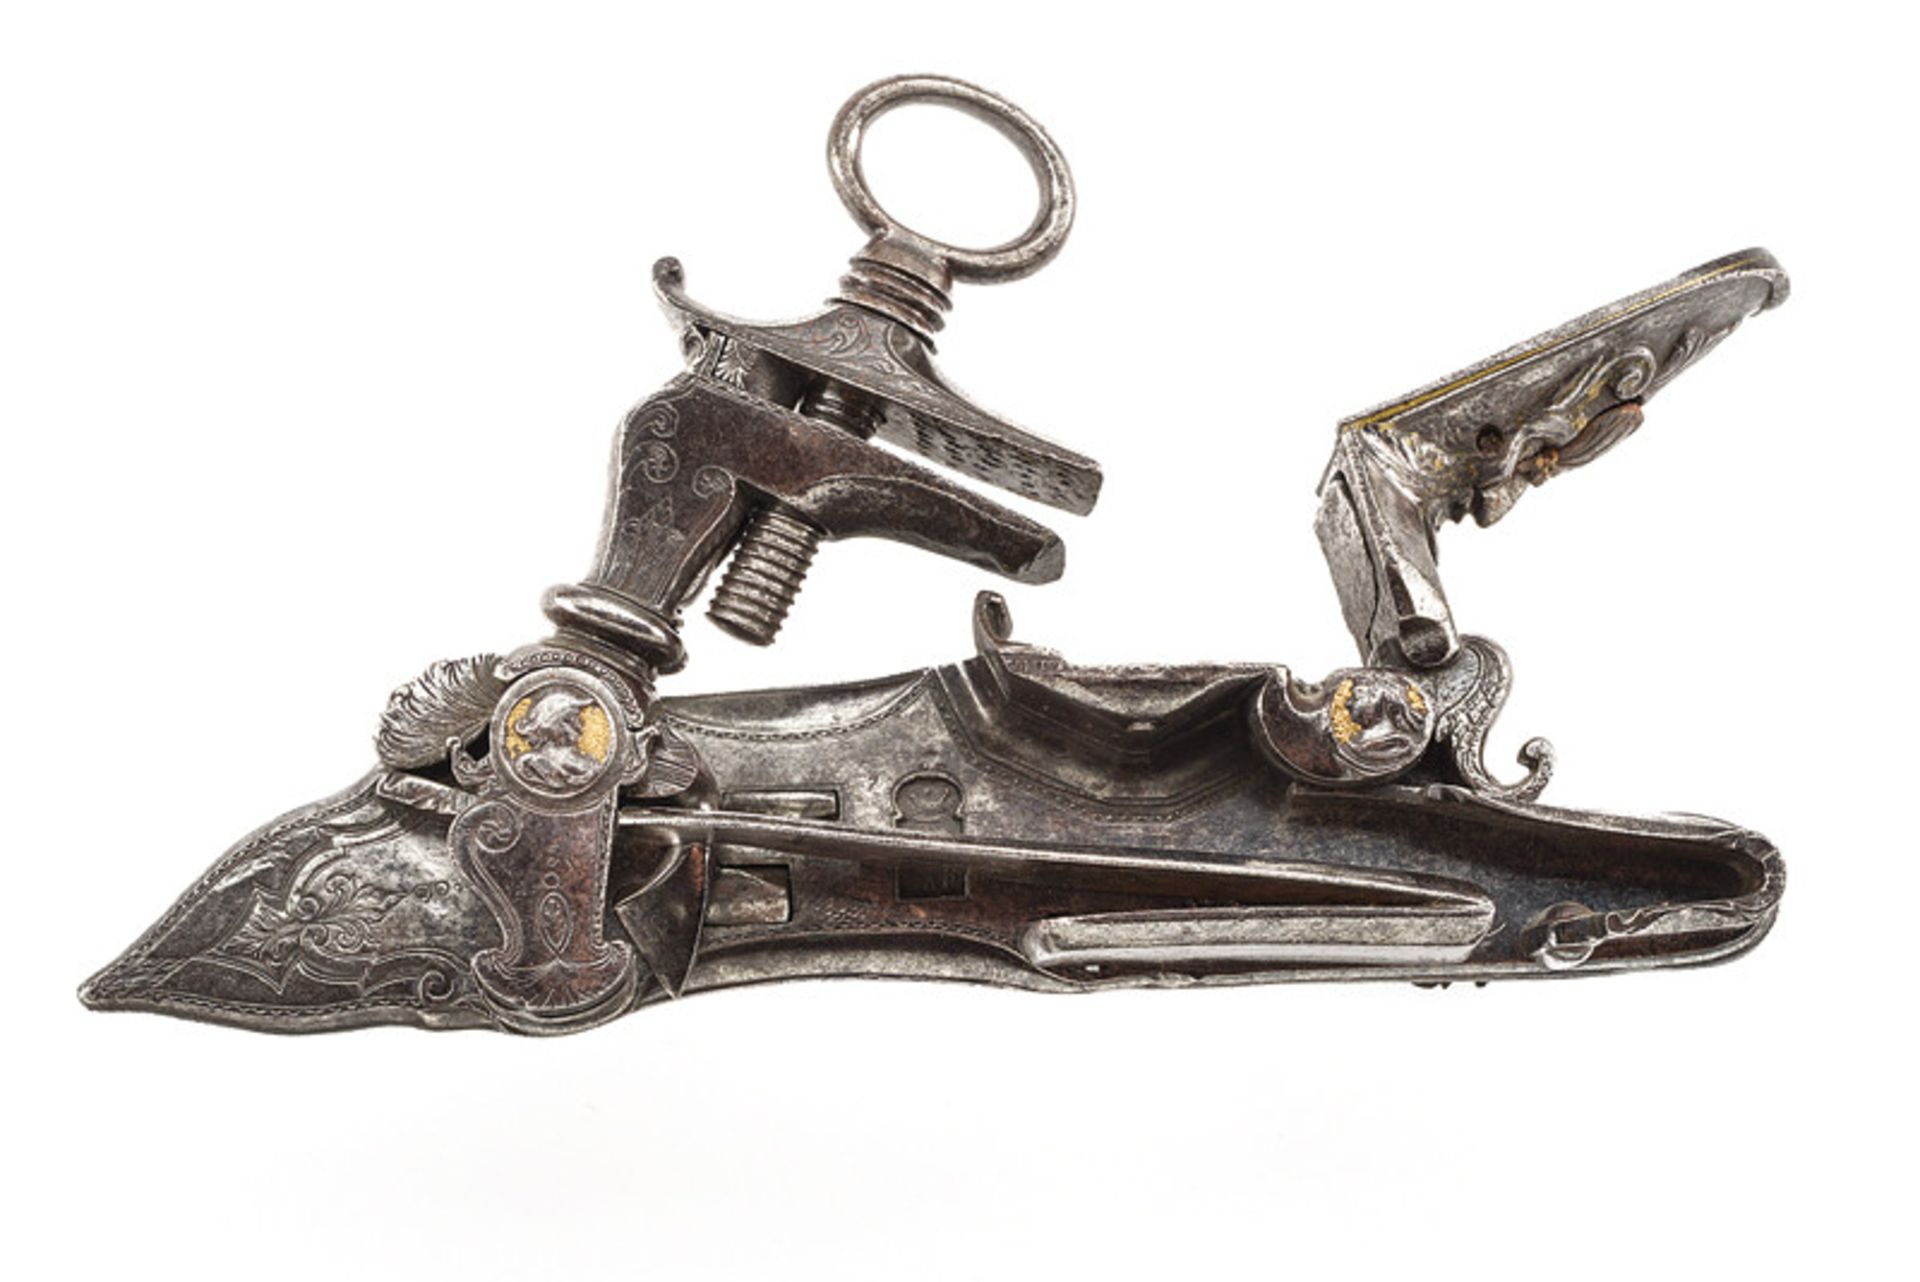 A rare miquelet flintlock dating: 18th Century provenance: Naples Lock with the crowned stamp "FR DI